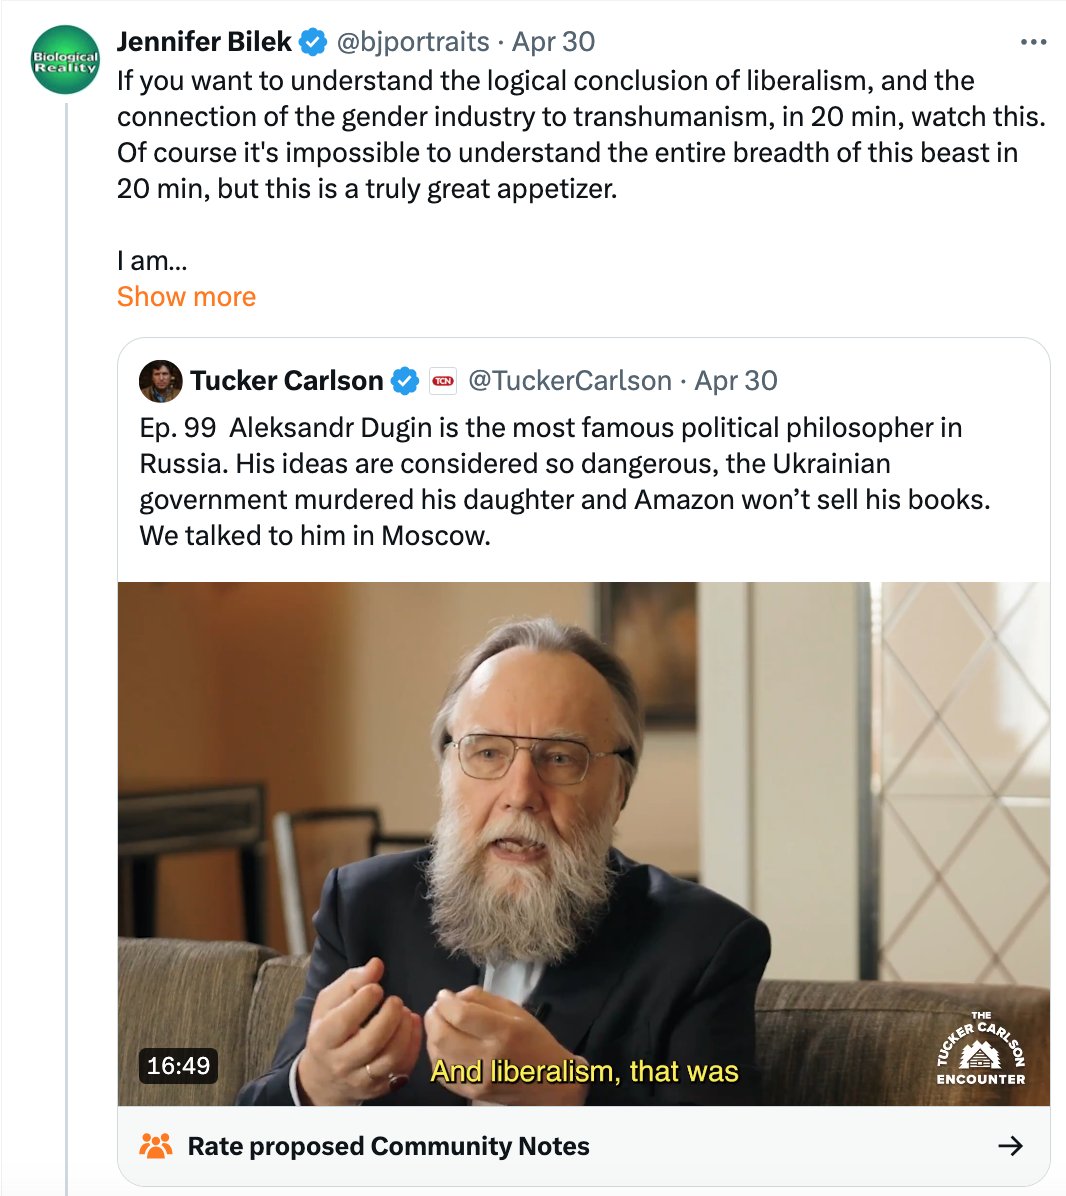 I am sorry, but sharing and amplifying an interview of Alexandr Dugin with Tucker Carlson in the name of fighting trans activism is... I don't know how I could describe this in a diplomatic way. Carlson aside, is it possible that Jennifer Bilek doesn't know who Dugin is? Does she…